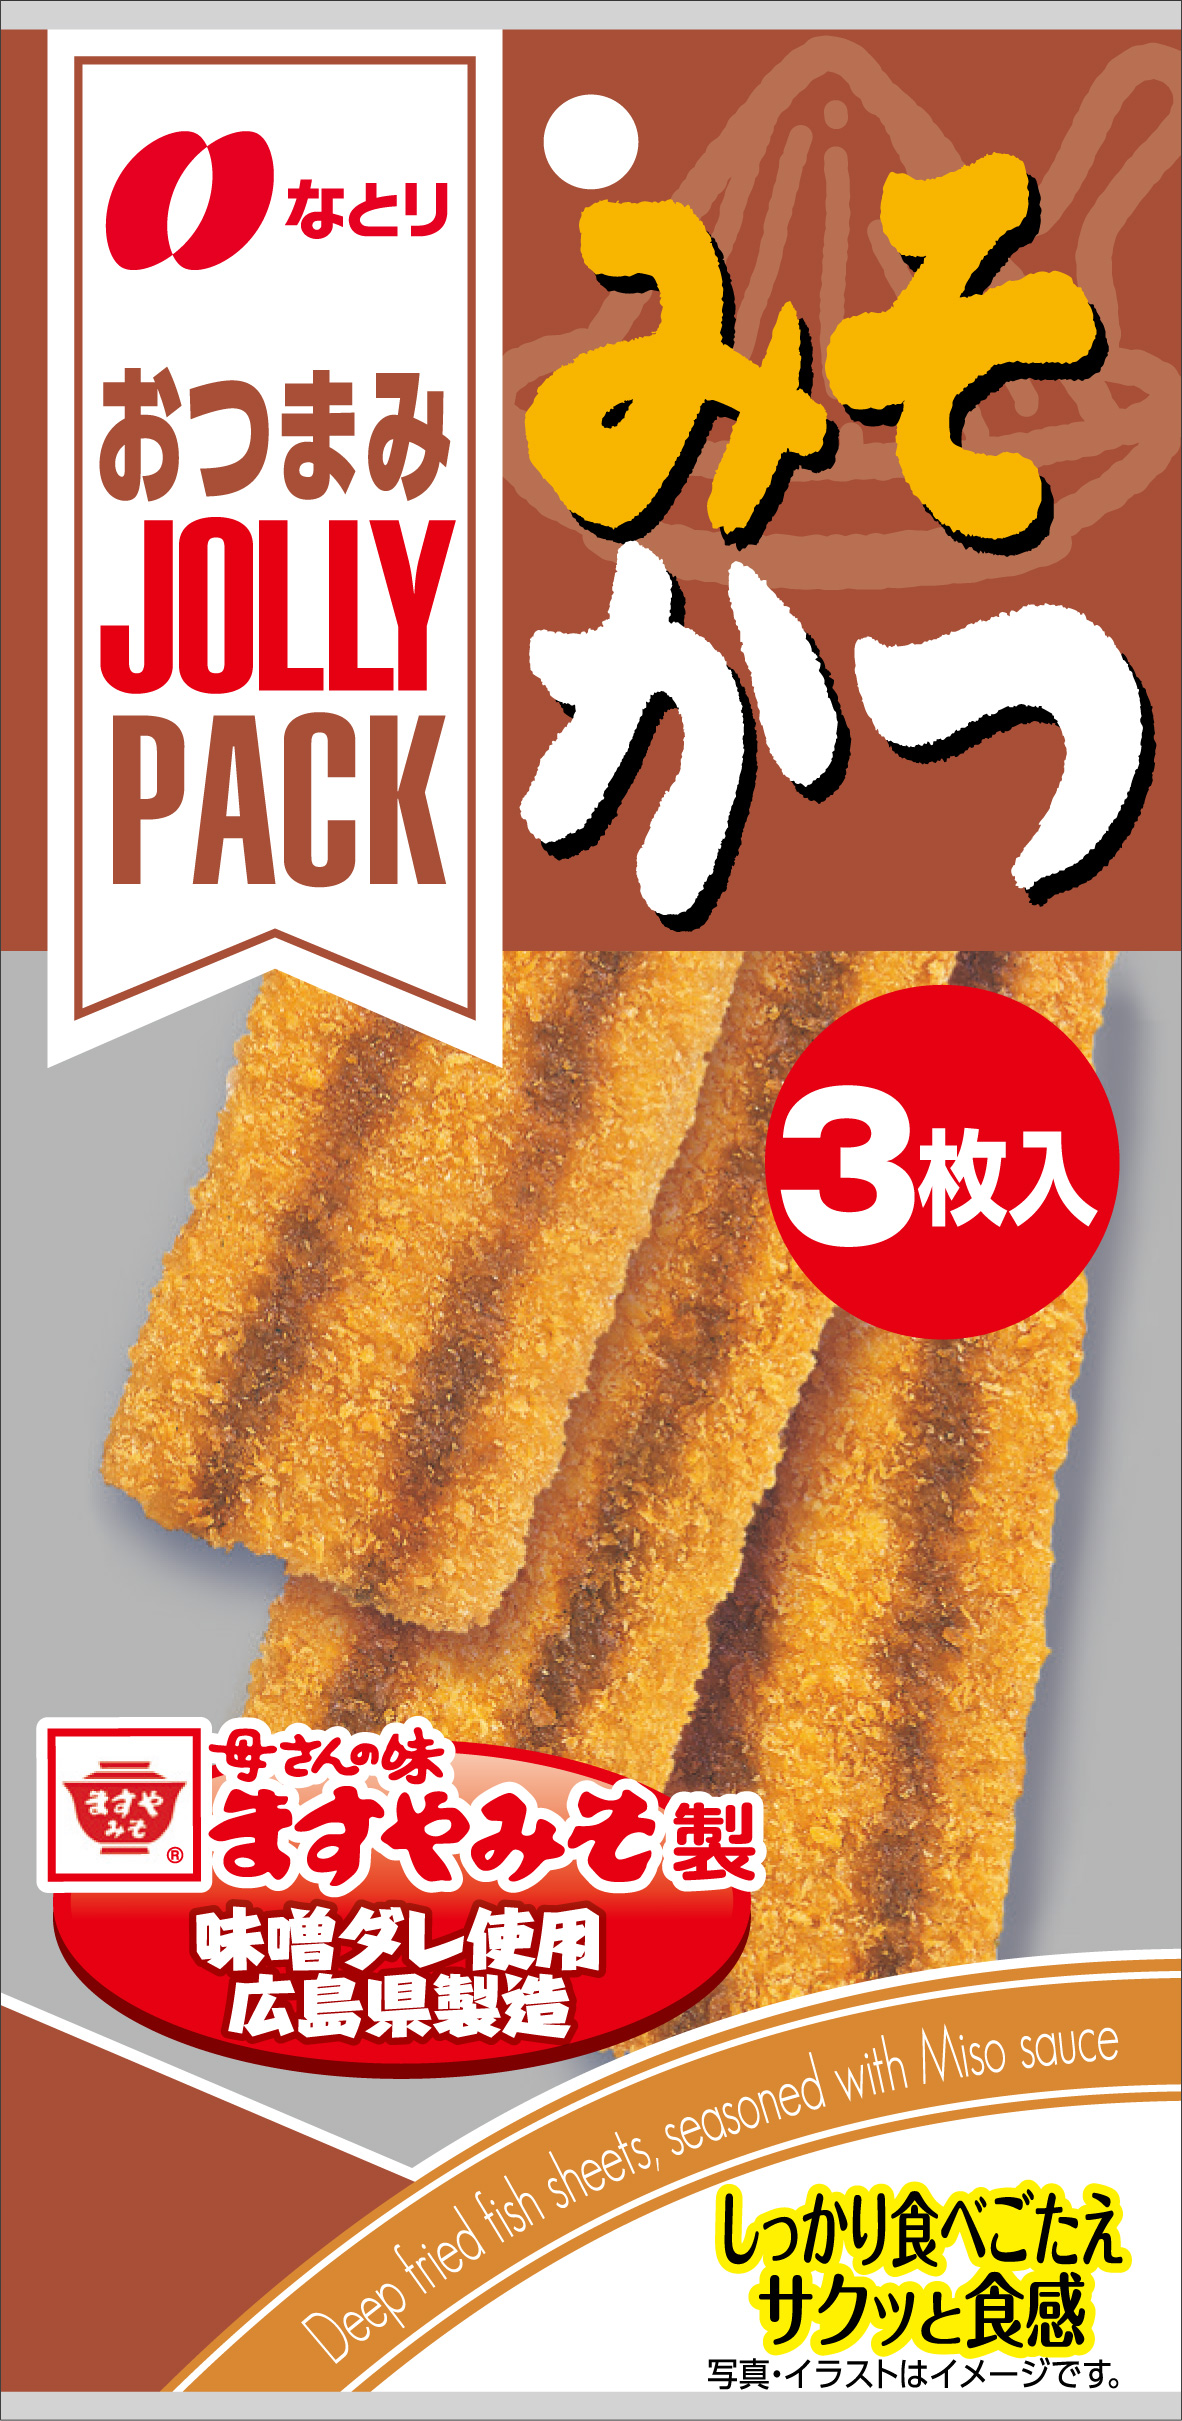 JOLLY PACK<br>みそかつ